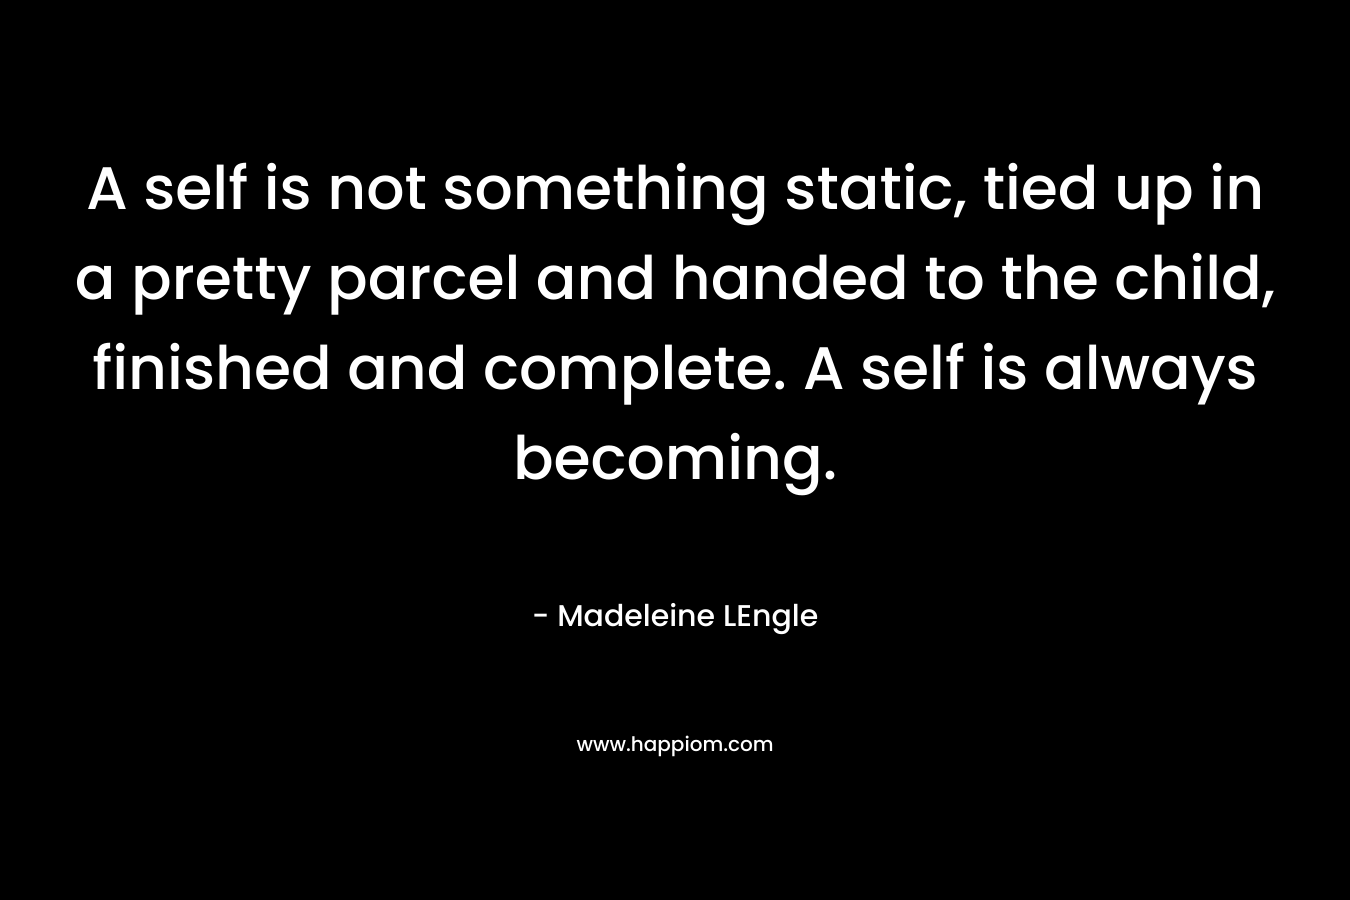 A self is not something static, tied up in a pretty parcel and handed to the child, finished and complete. A self is always becoming. – Madeleine LEngle